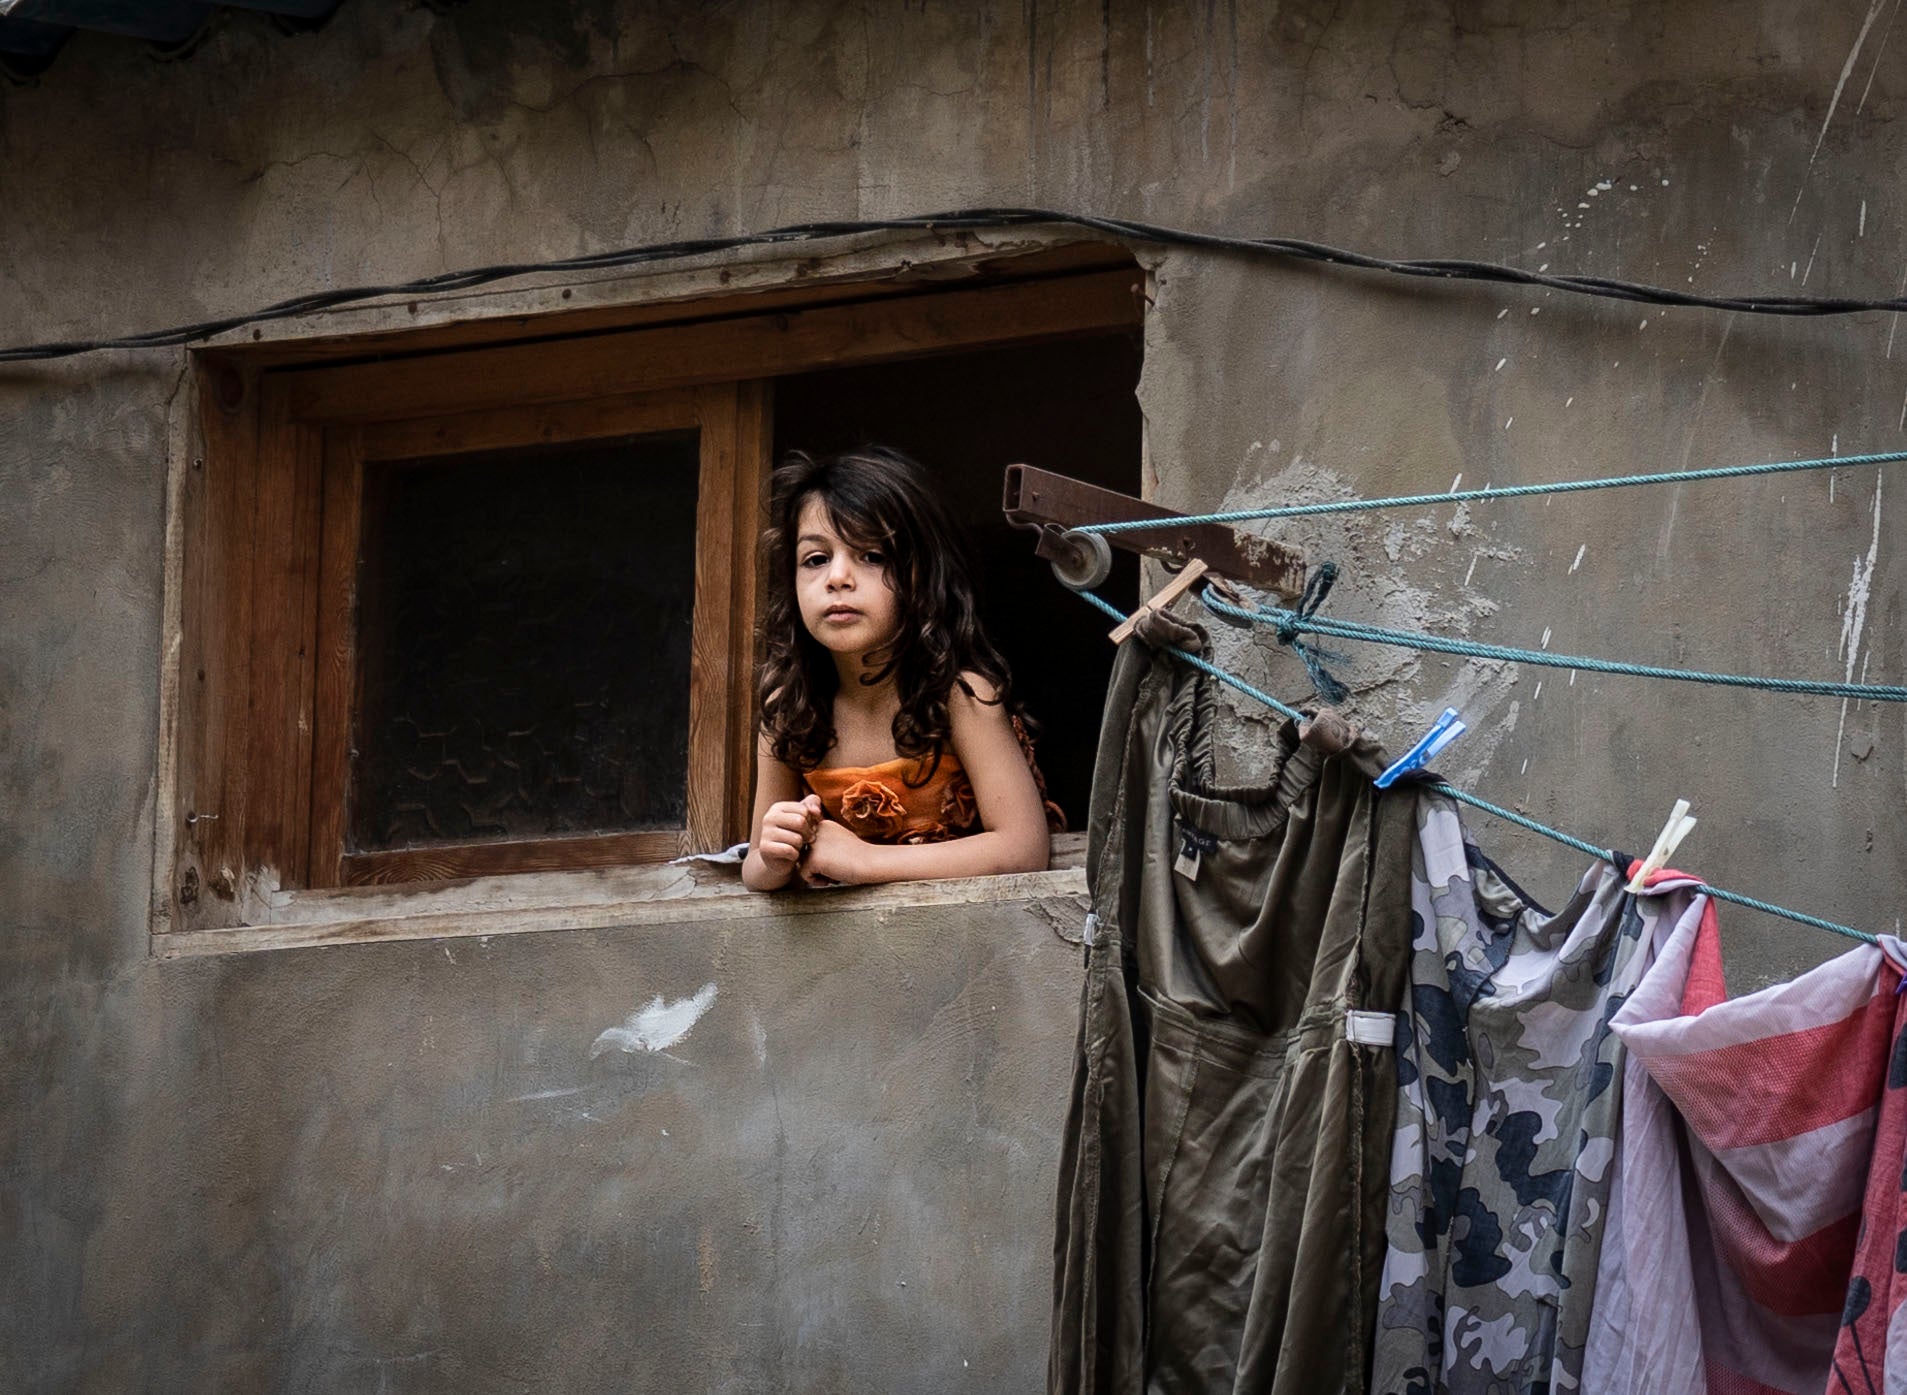 A child looks out of her window in the impoverished neighbourhood of Qobbeh, Tripoli